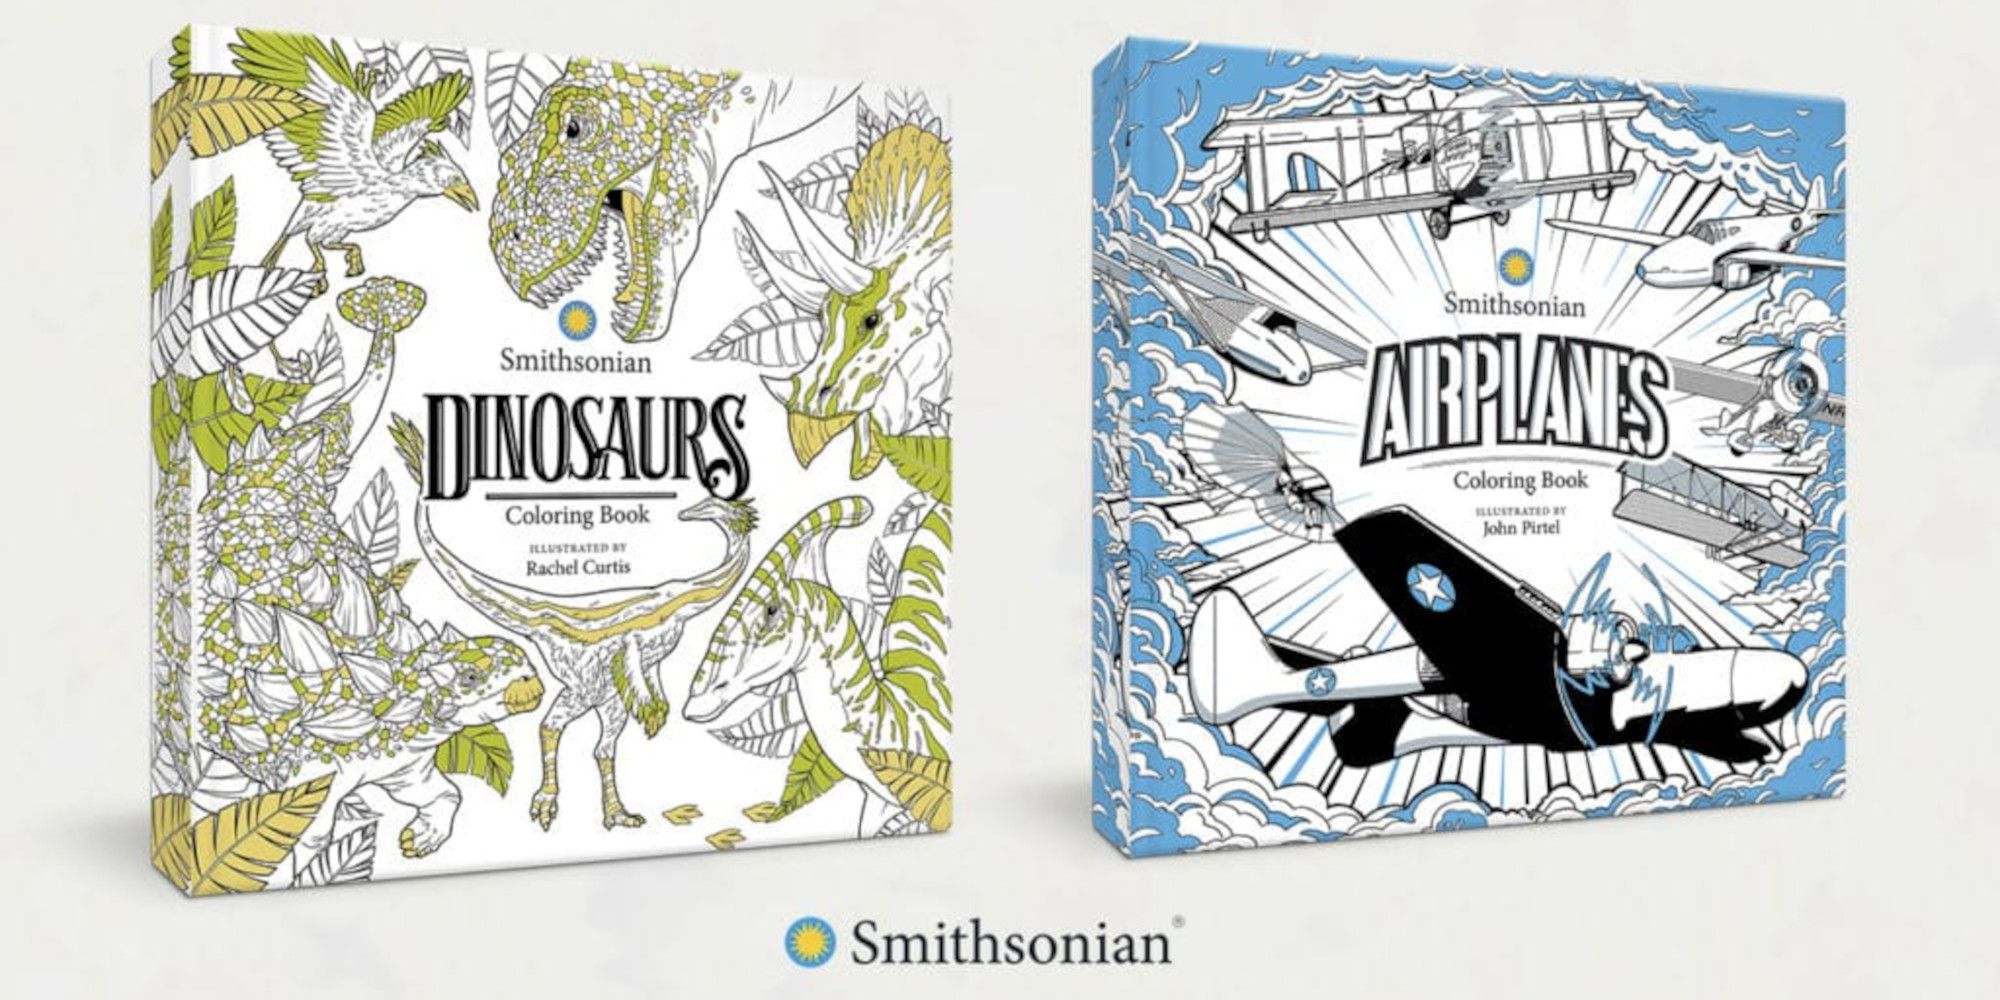 IDW Smithsonian Dinosaurs coloring book and Airplanes coloring book header